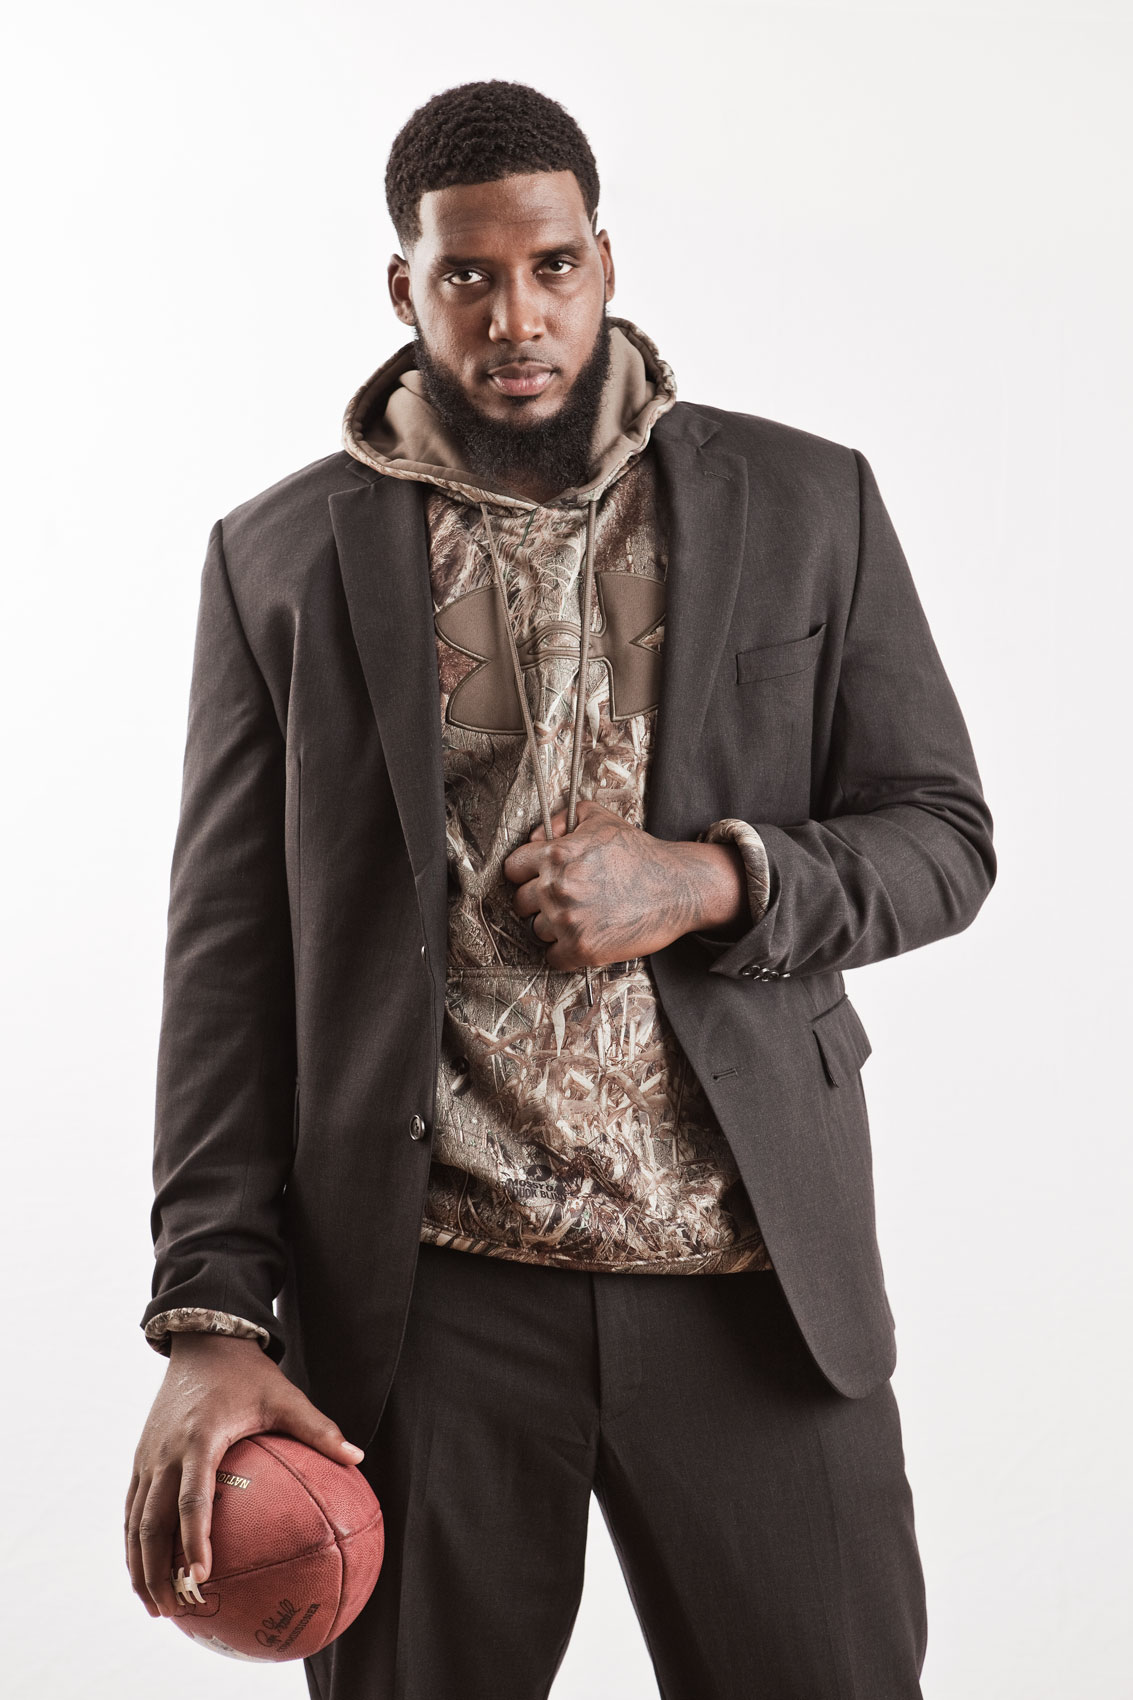 Portrait of former NFL New York Giants Tight End Larry Donnell by Celebrity Photographer Michael Weschler